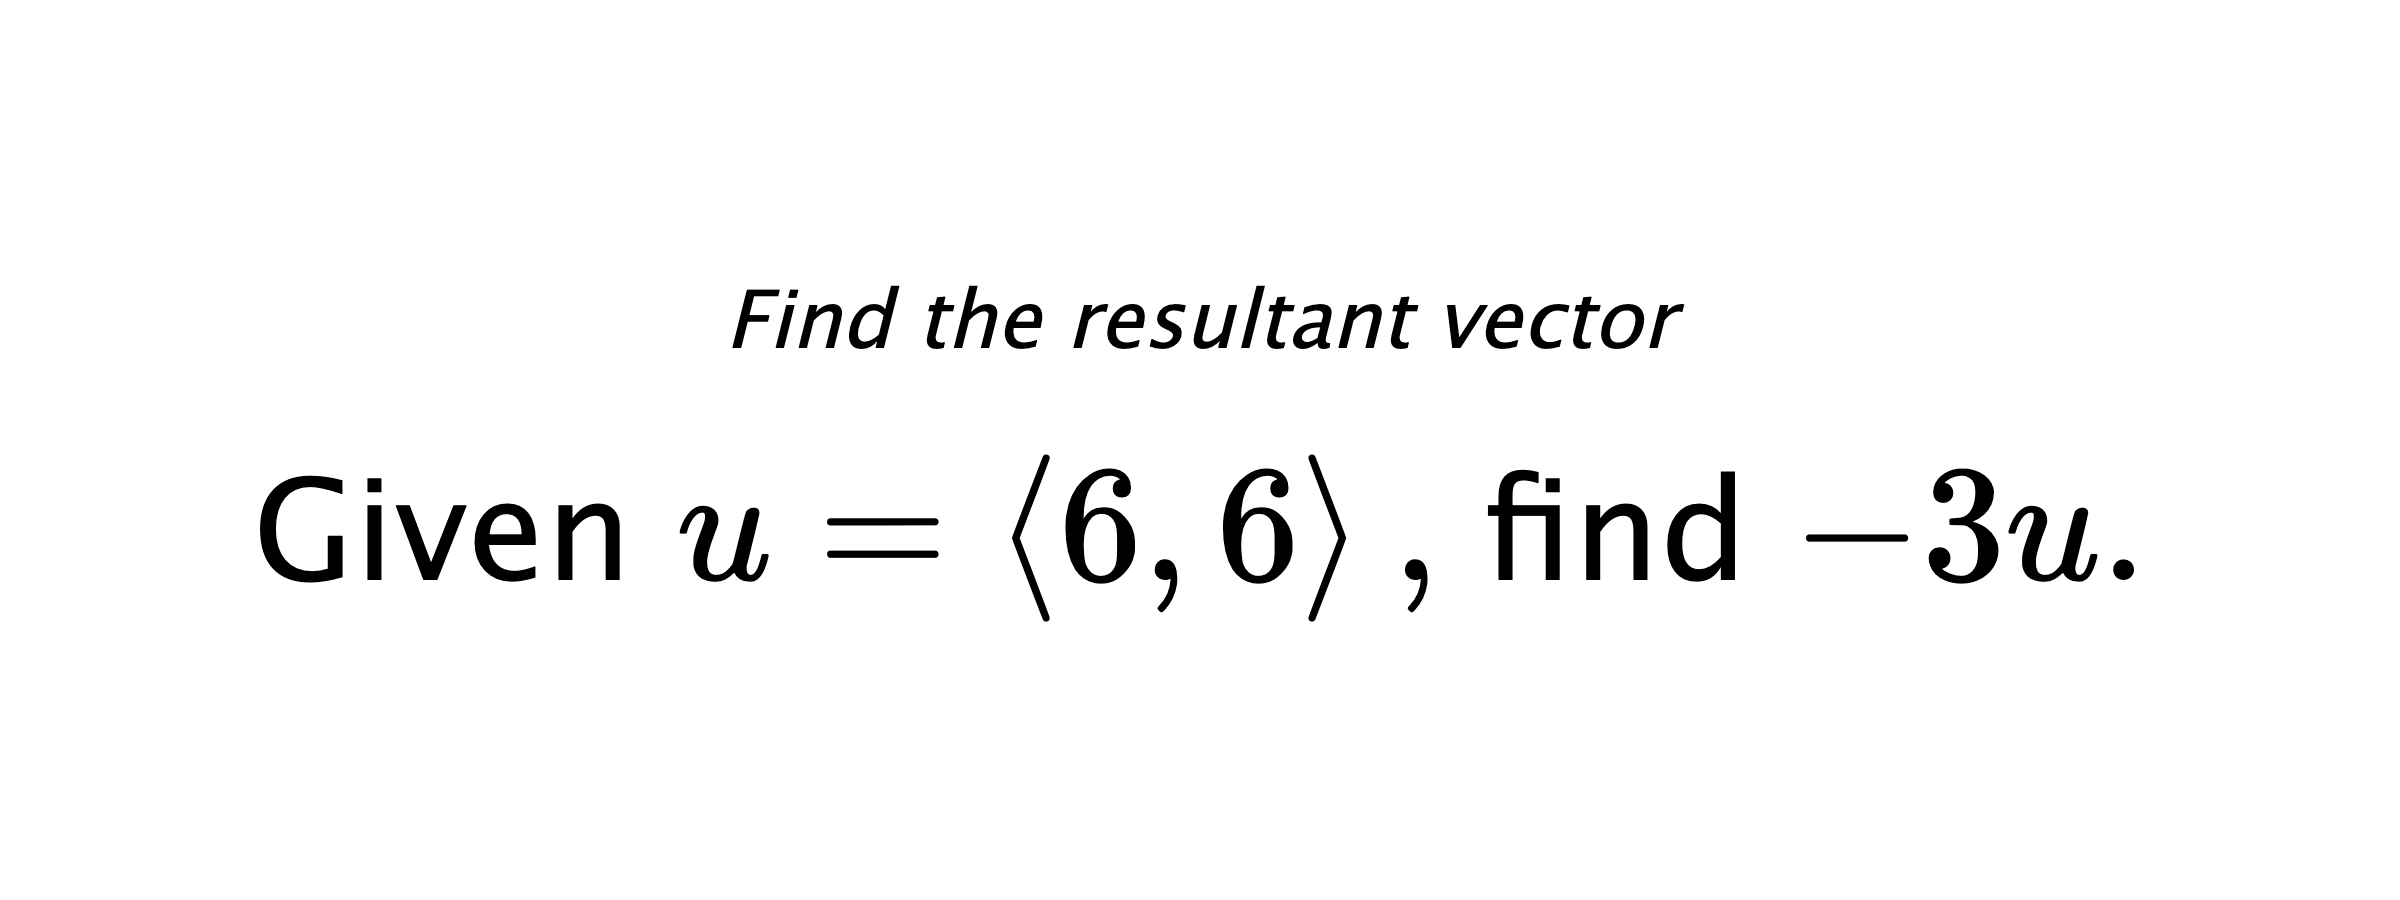 Find the resultant vector Given $ u = \left< 6,6 \right> ,$ find $ -3u .$